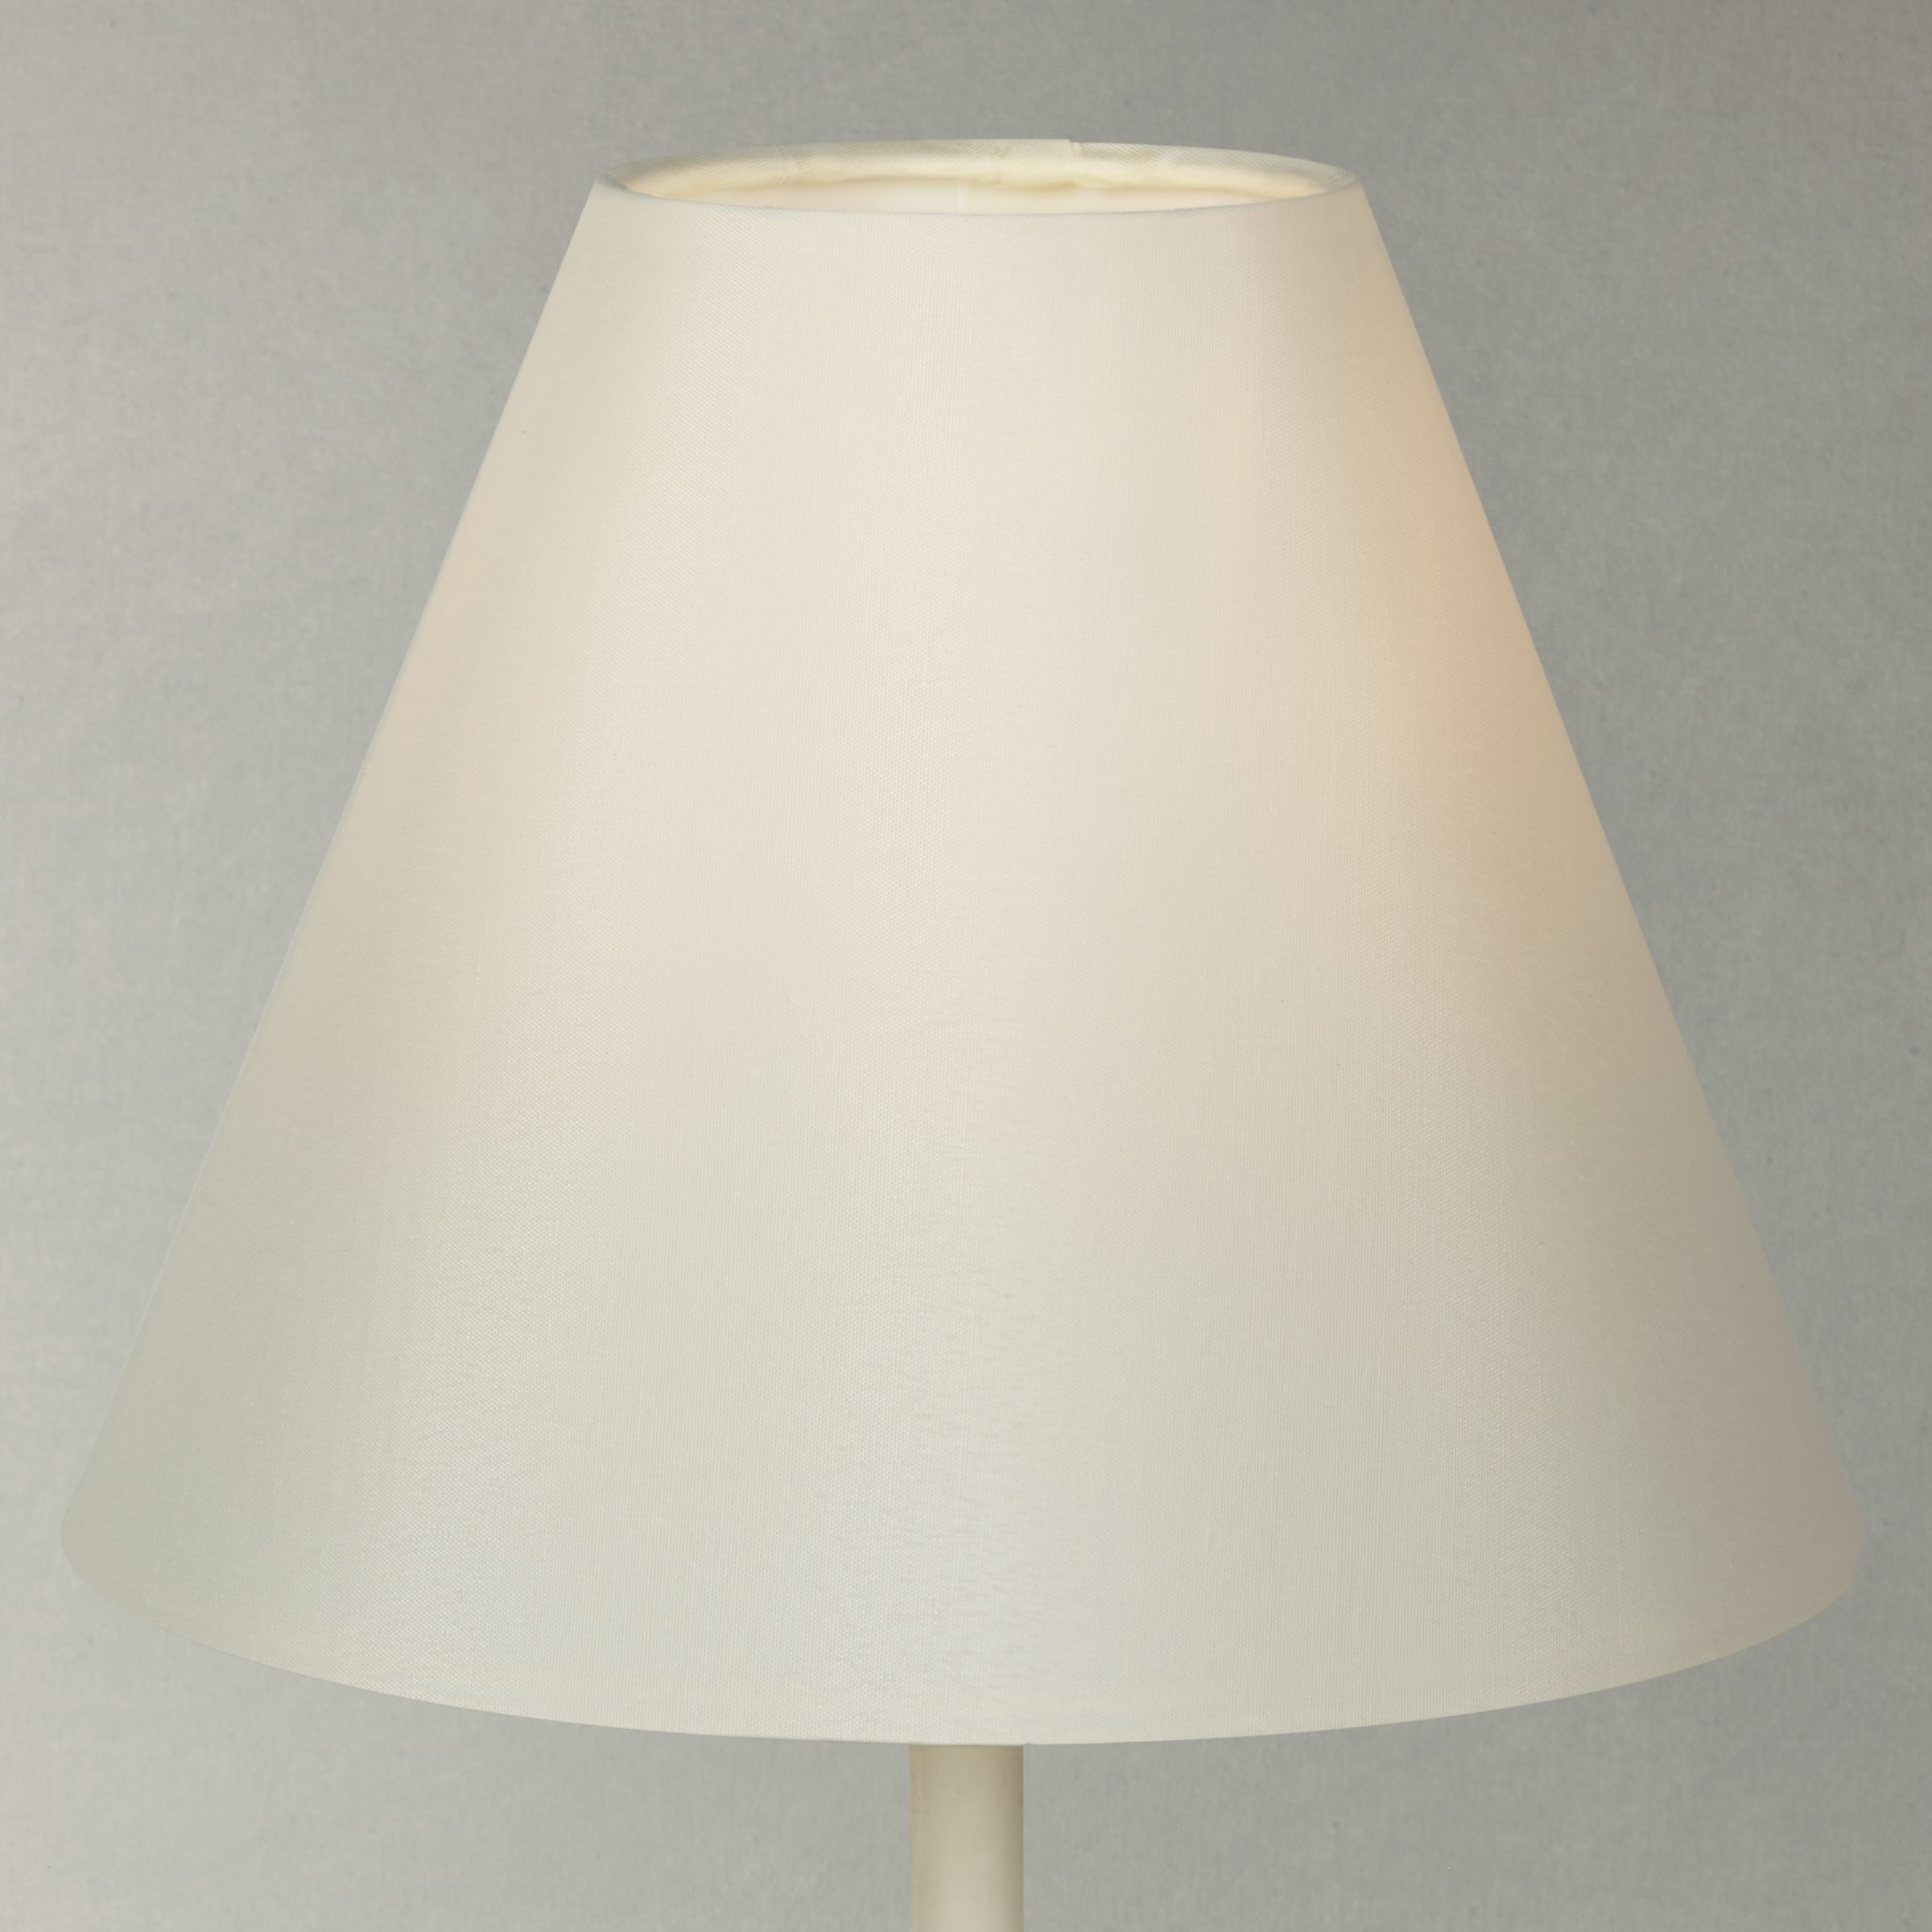 Lulu Coolie Lampshade 20cm, Coolie Shades For Table Lamps